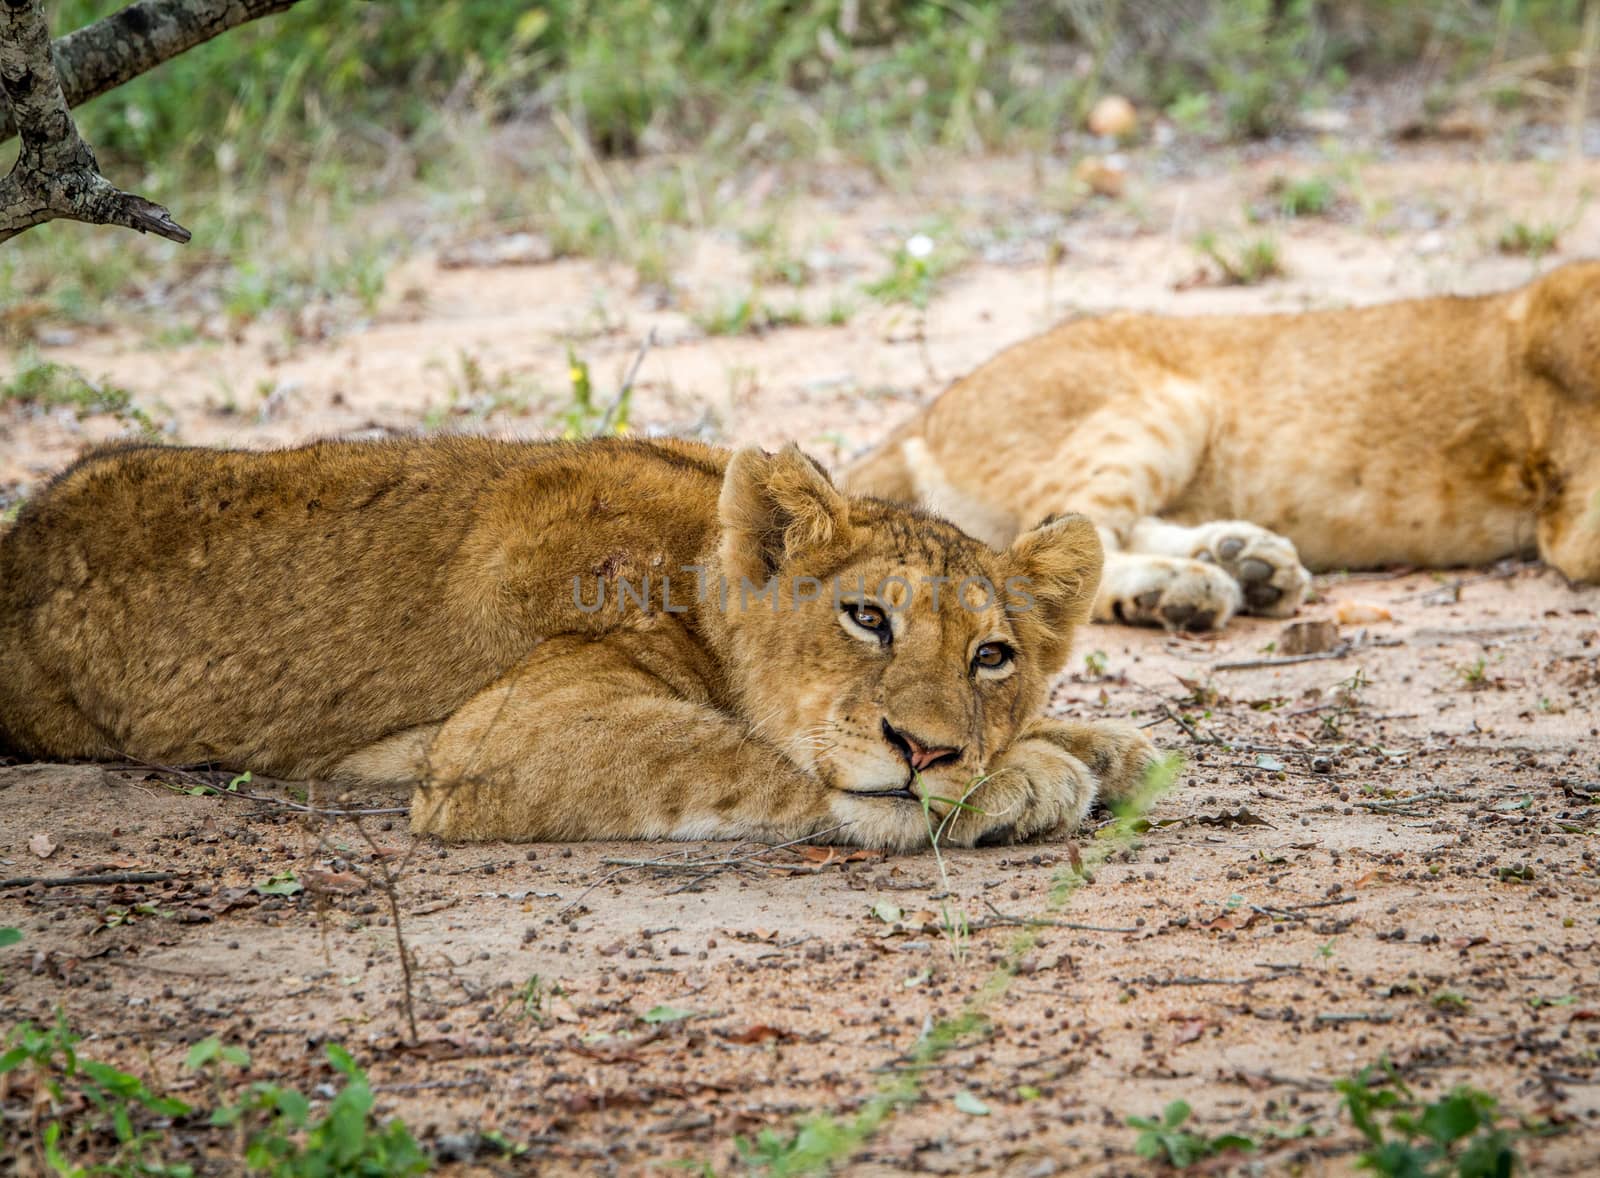 Laying Lion cub in the Kapama Game Reserve, South Africa.